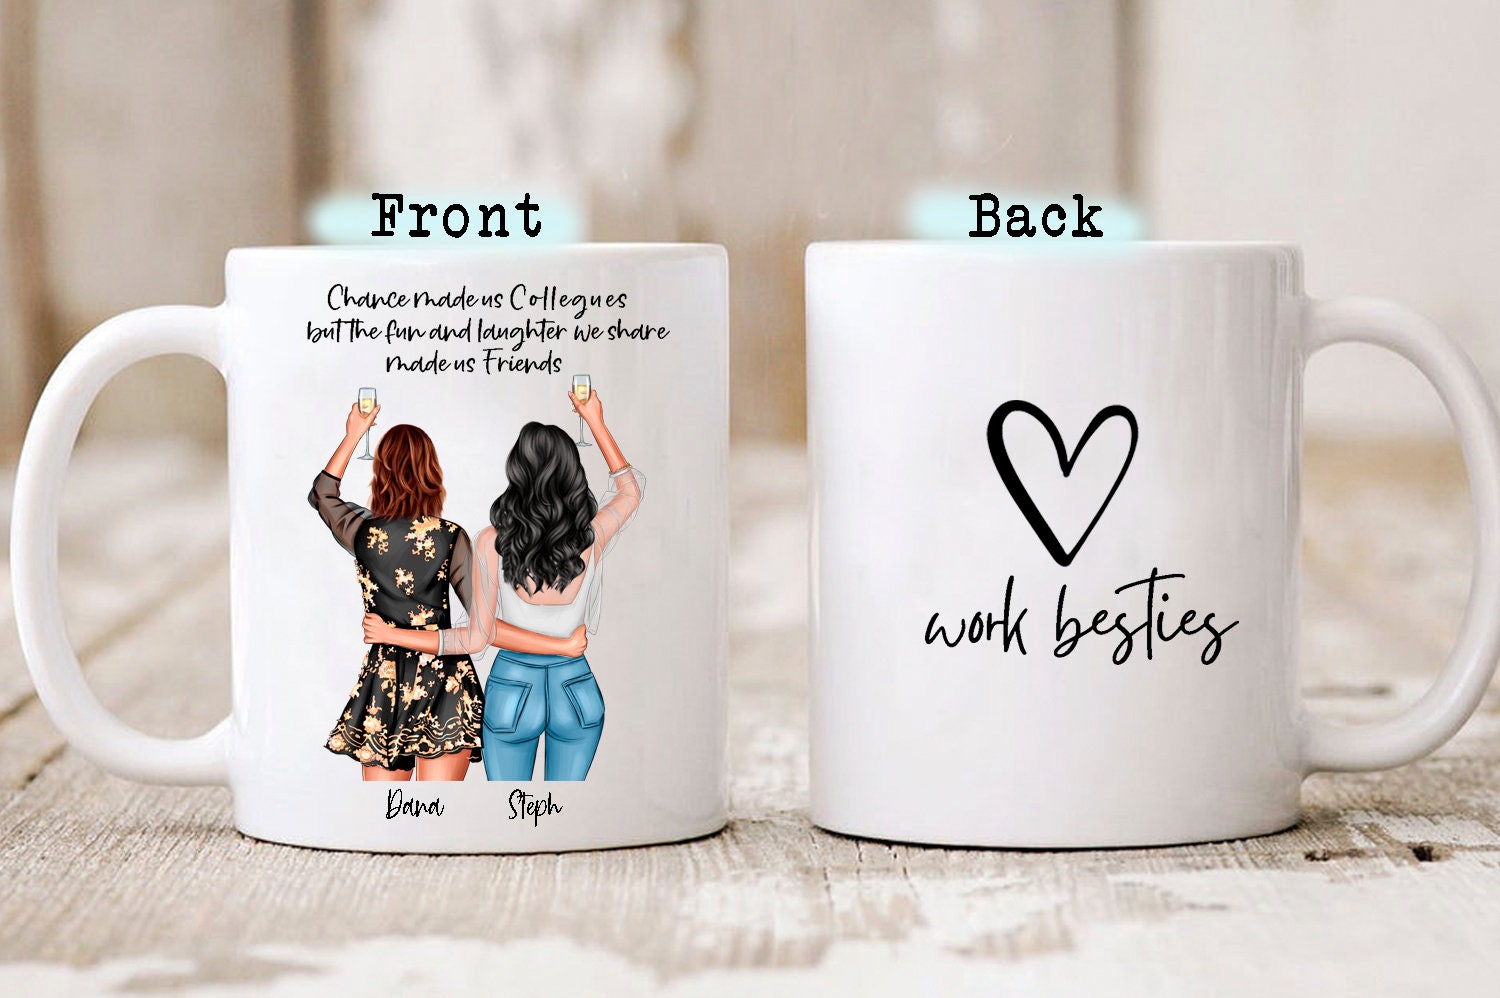 I Drink Coffee for Your Protection Engraved Coffee Tumbler, Funny Travel Coffee  Mug, Funny Cup, Funny Coworker Gift, Coffee Mug Gift 